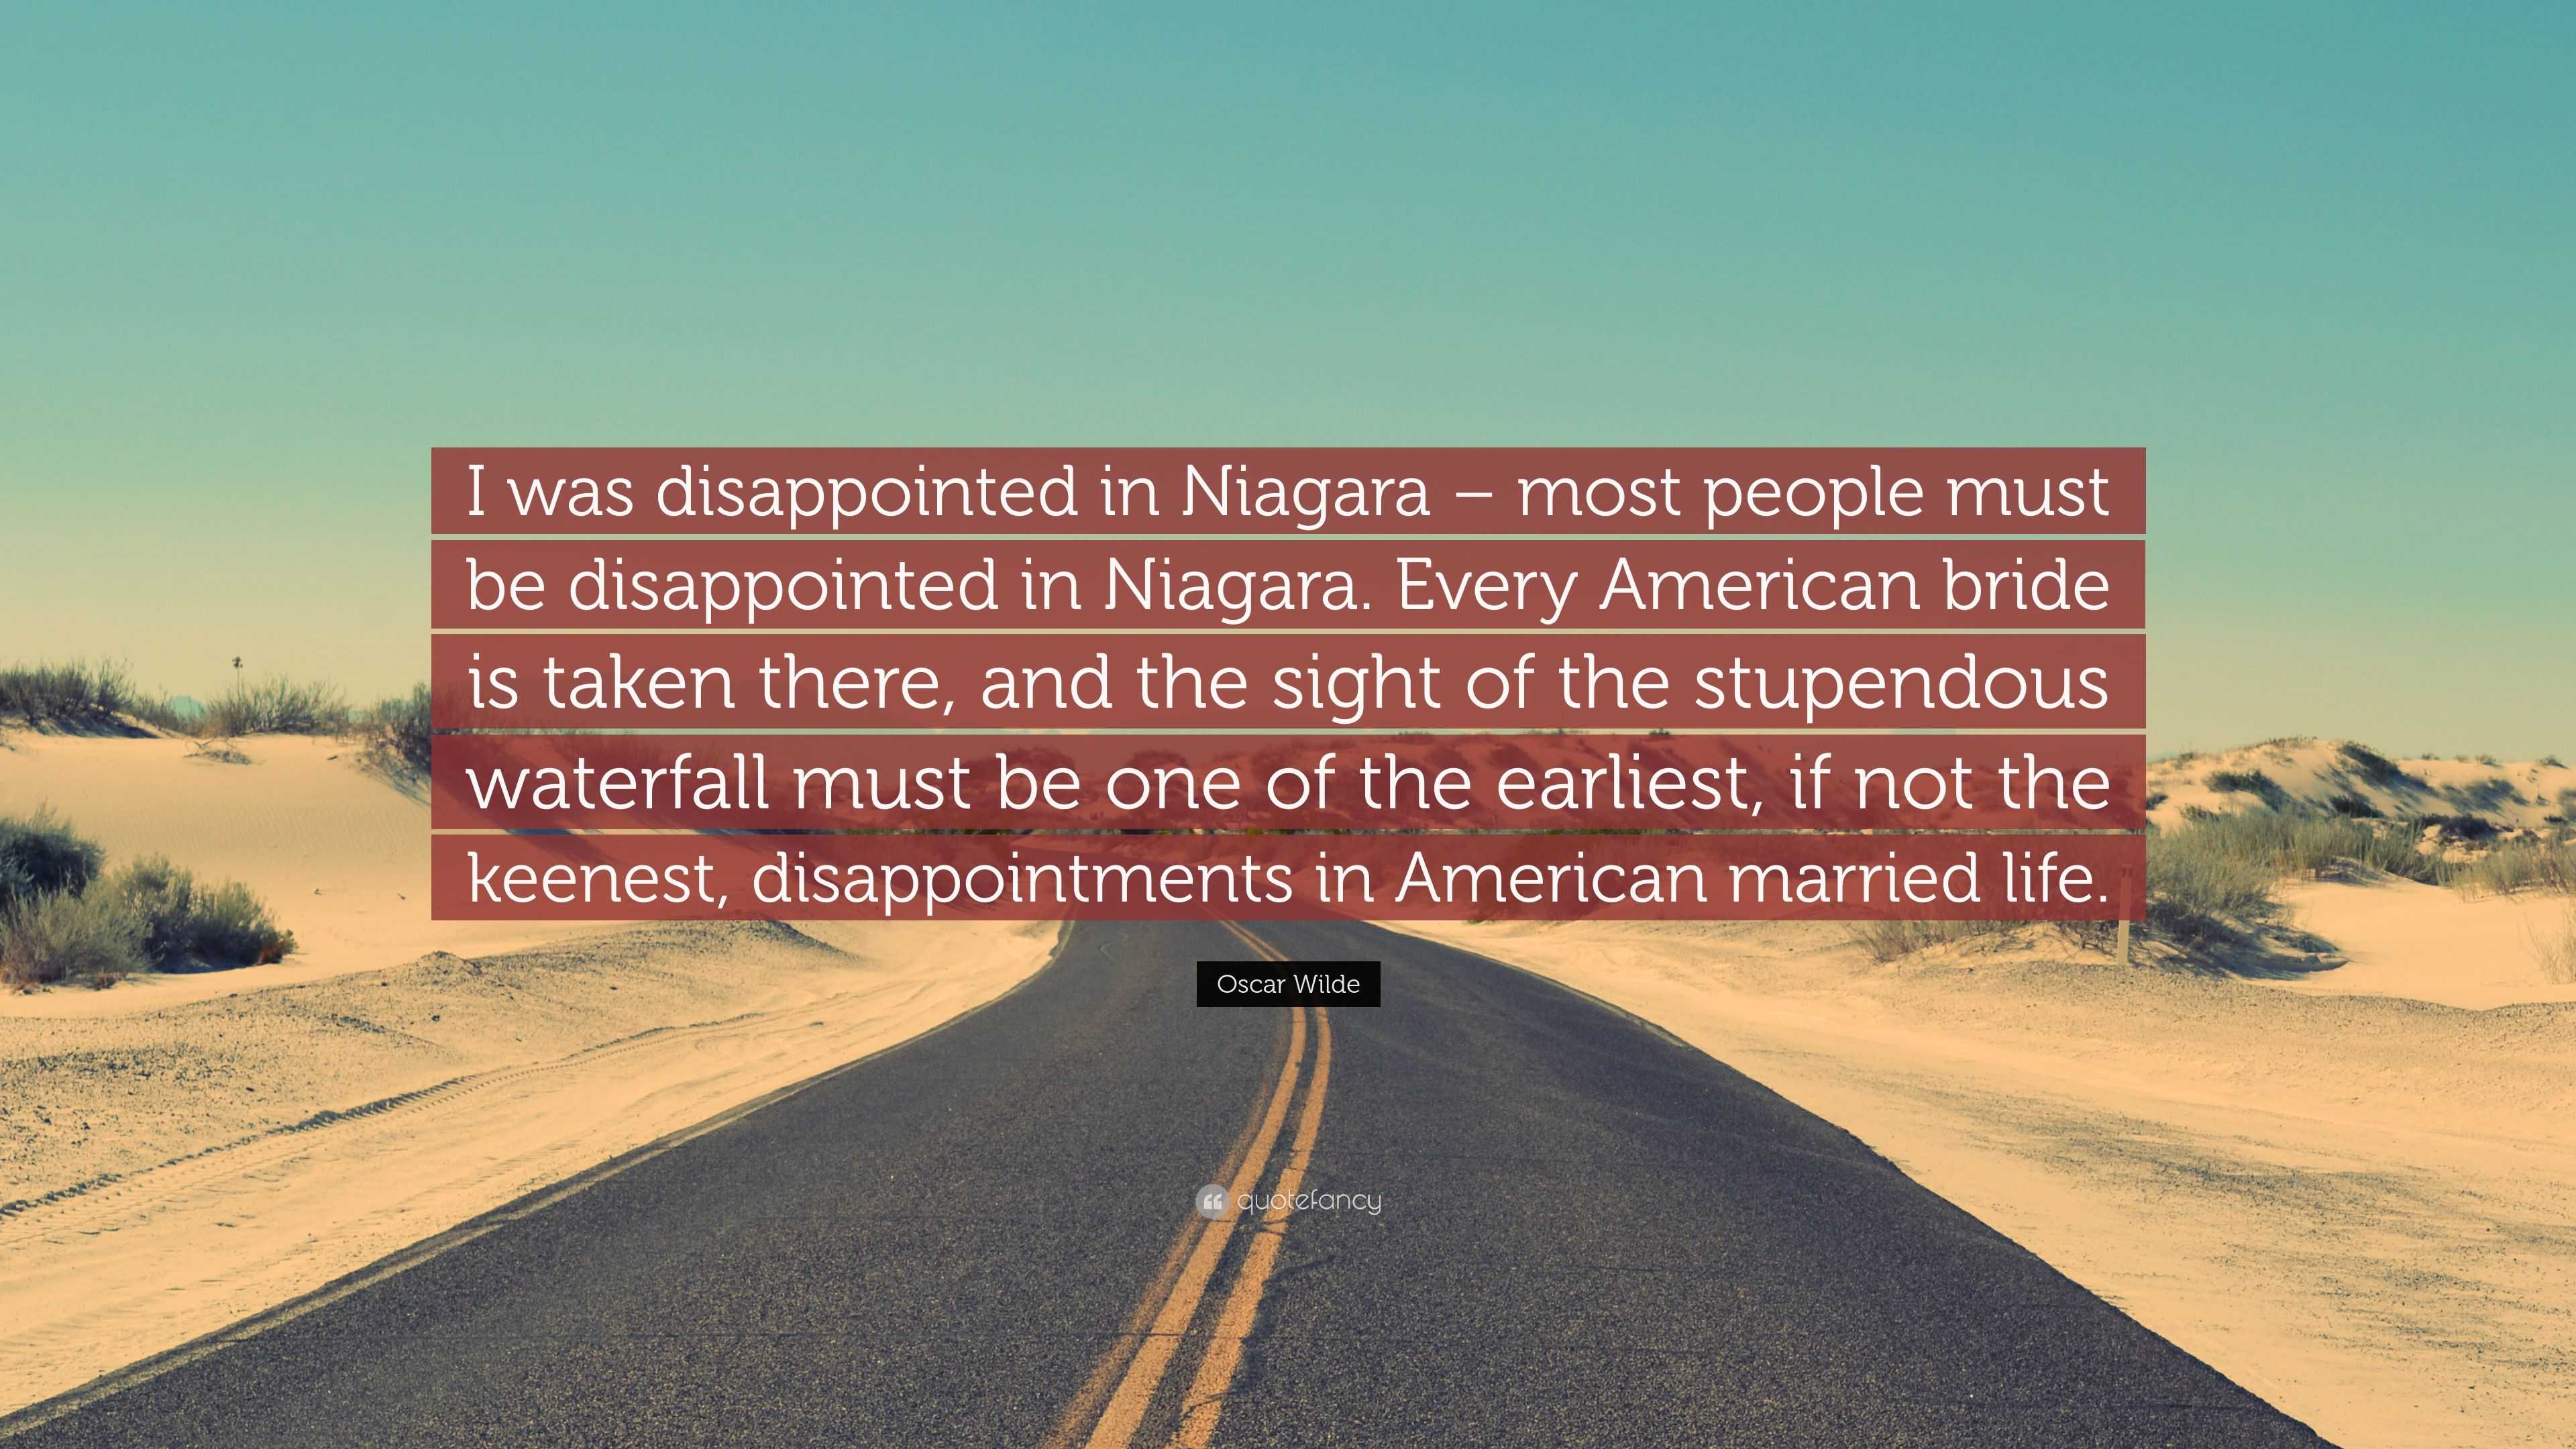 Oscar Wilde Quote: “I Was Disappointed In Niagara – Most People Must Be  Disappointed In Niagara. Every American Bride Is Taken There, And Th...”